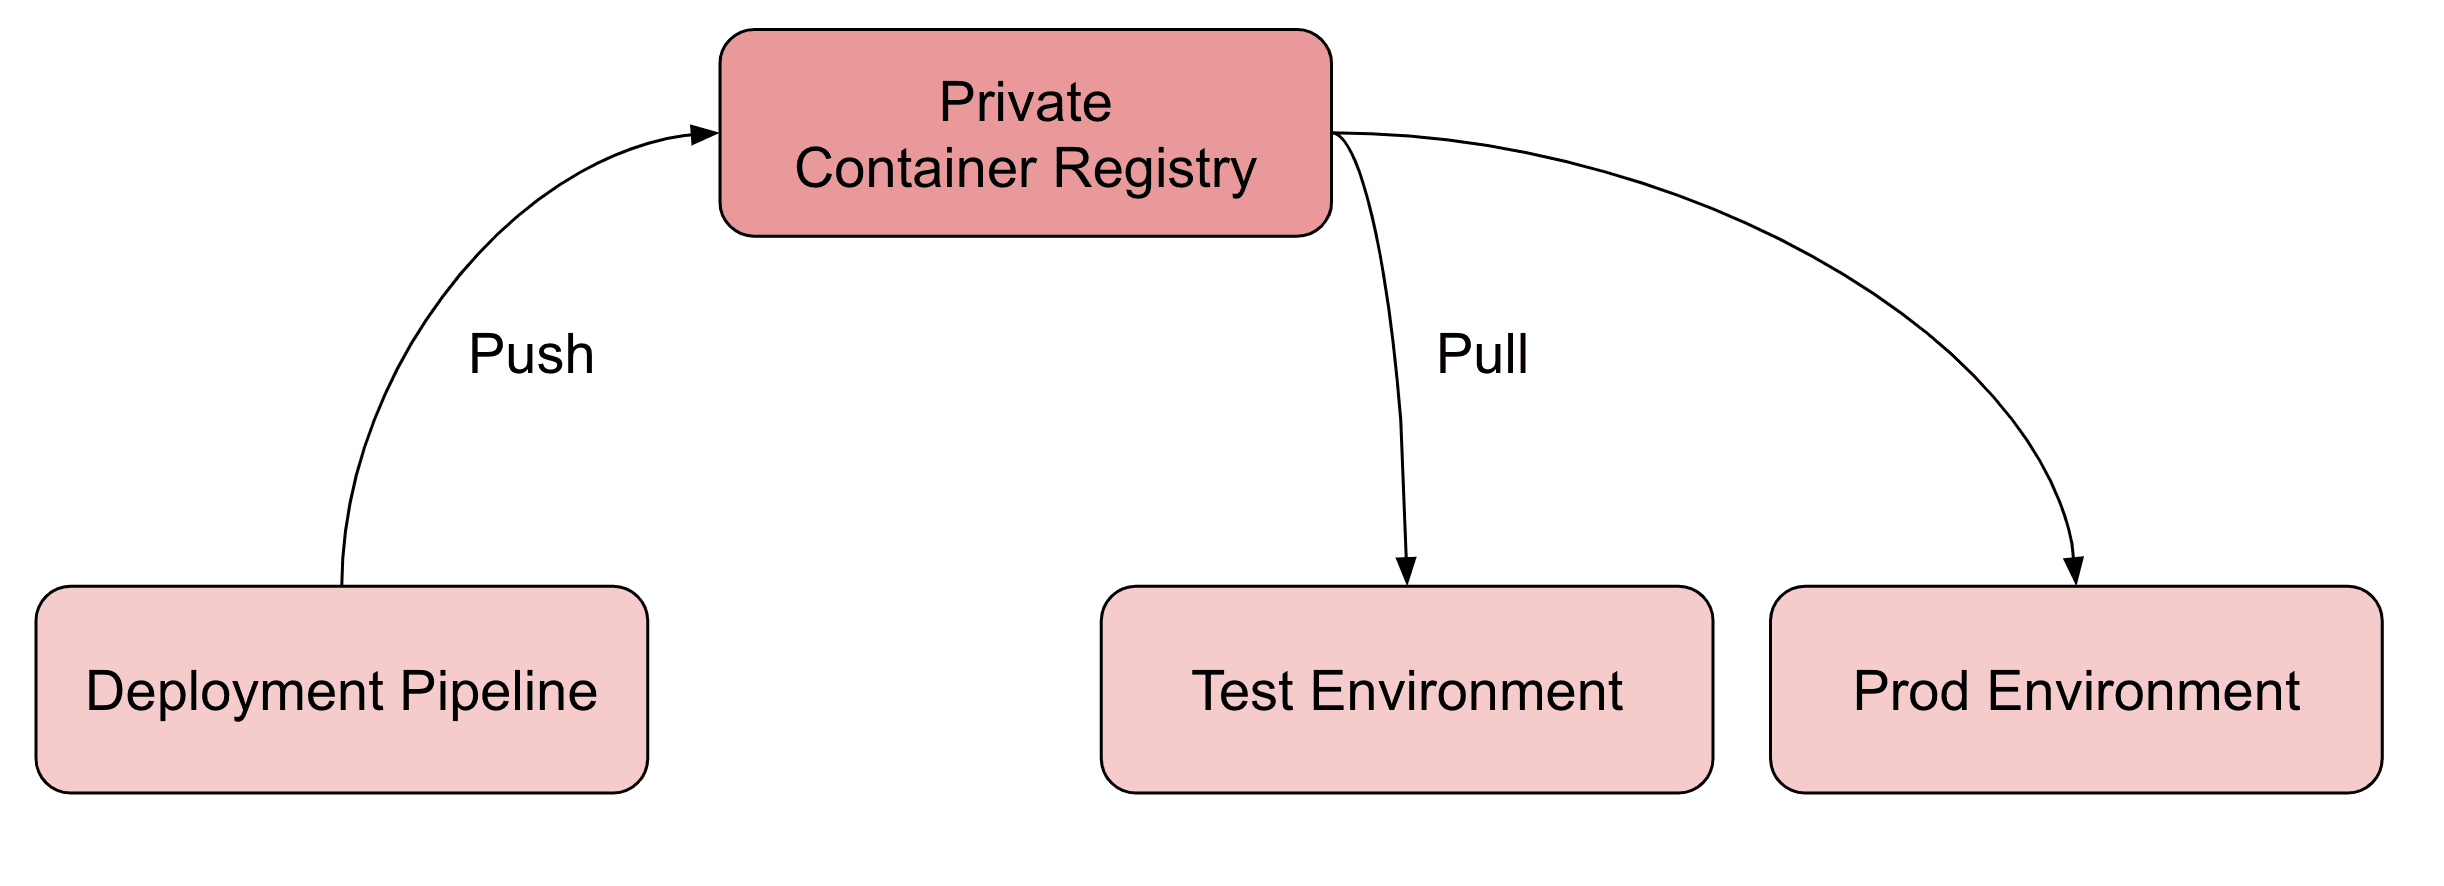 Use a public container registry to distribute software